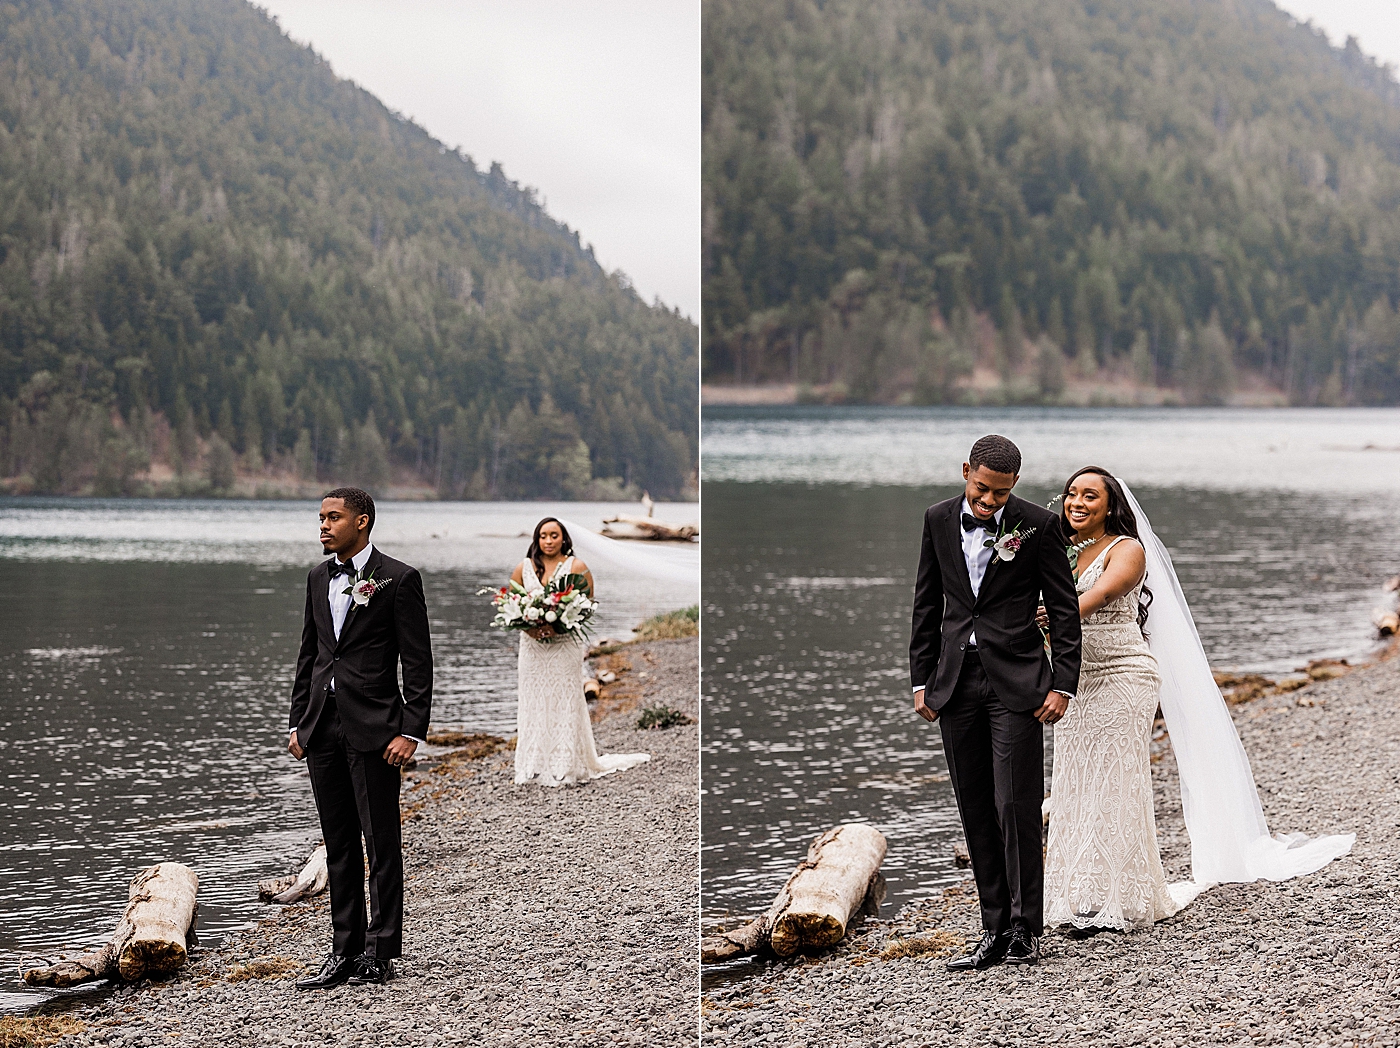 First look during Lake Crescent Elopement in the Olympic National Park | Photo by Megan Montalvo Photography